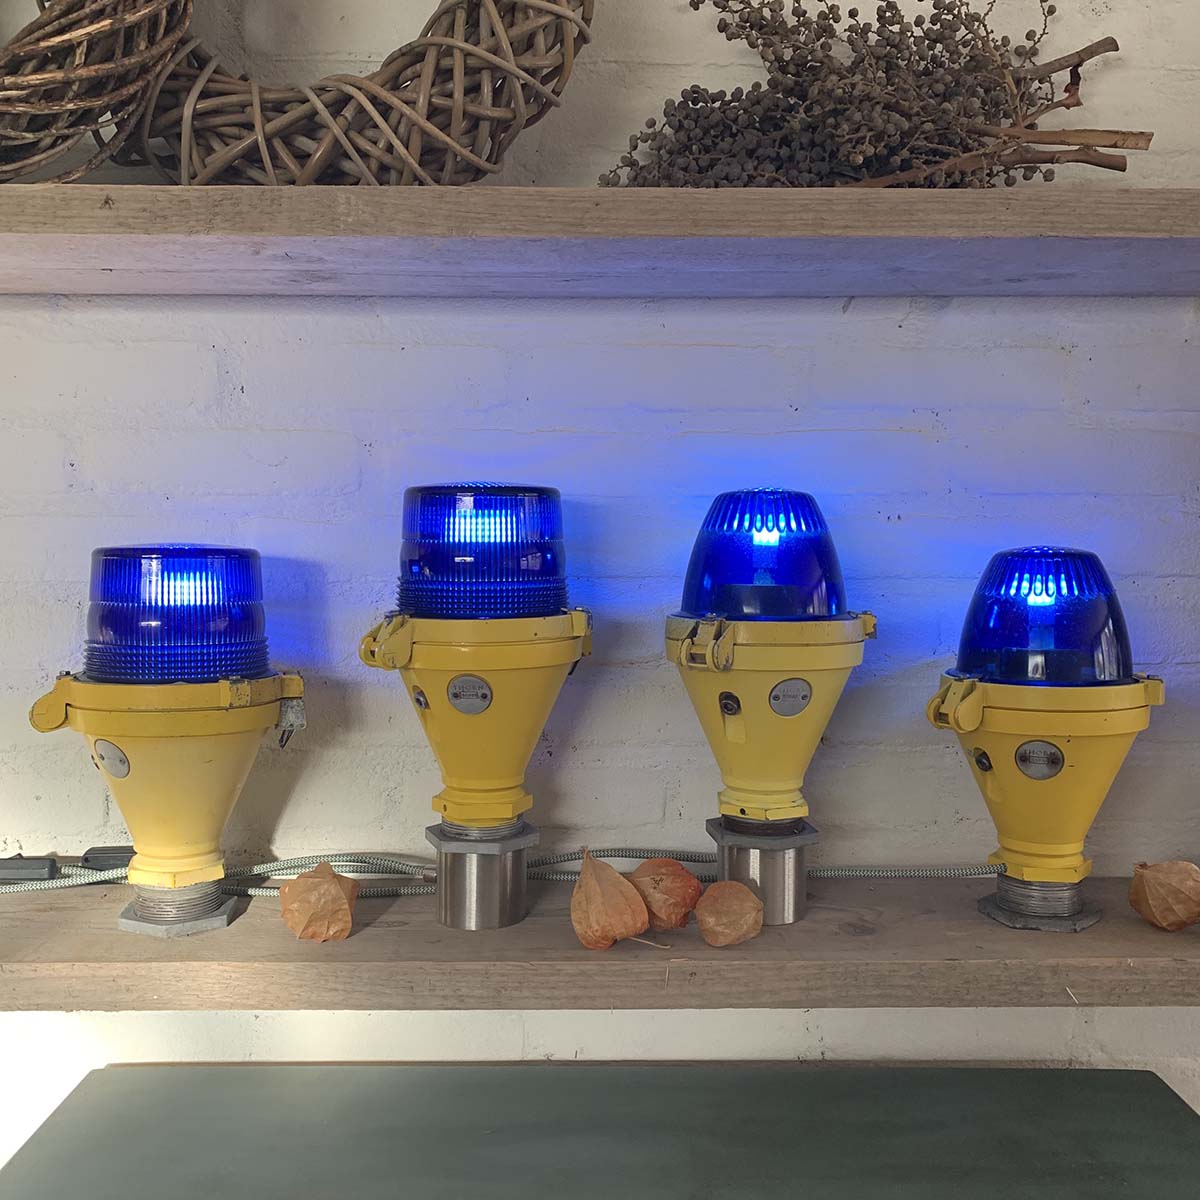 Four refurbished Thorn taxiway lights positioned next to each other to show all versions avialable for sale.